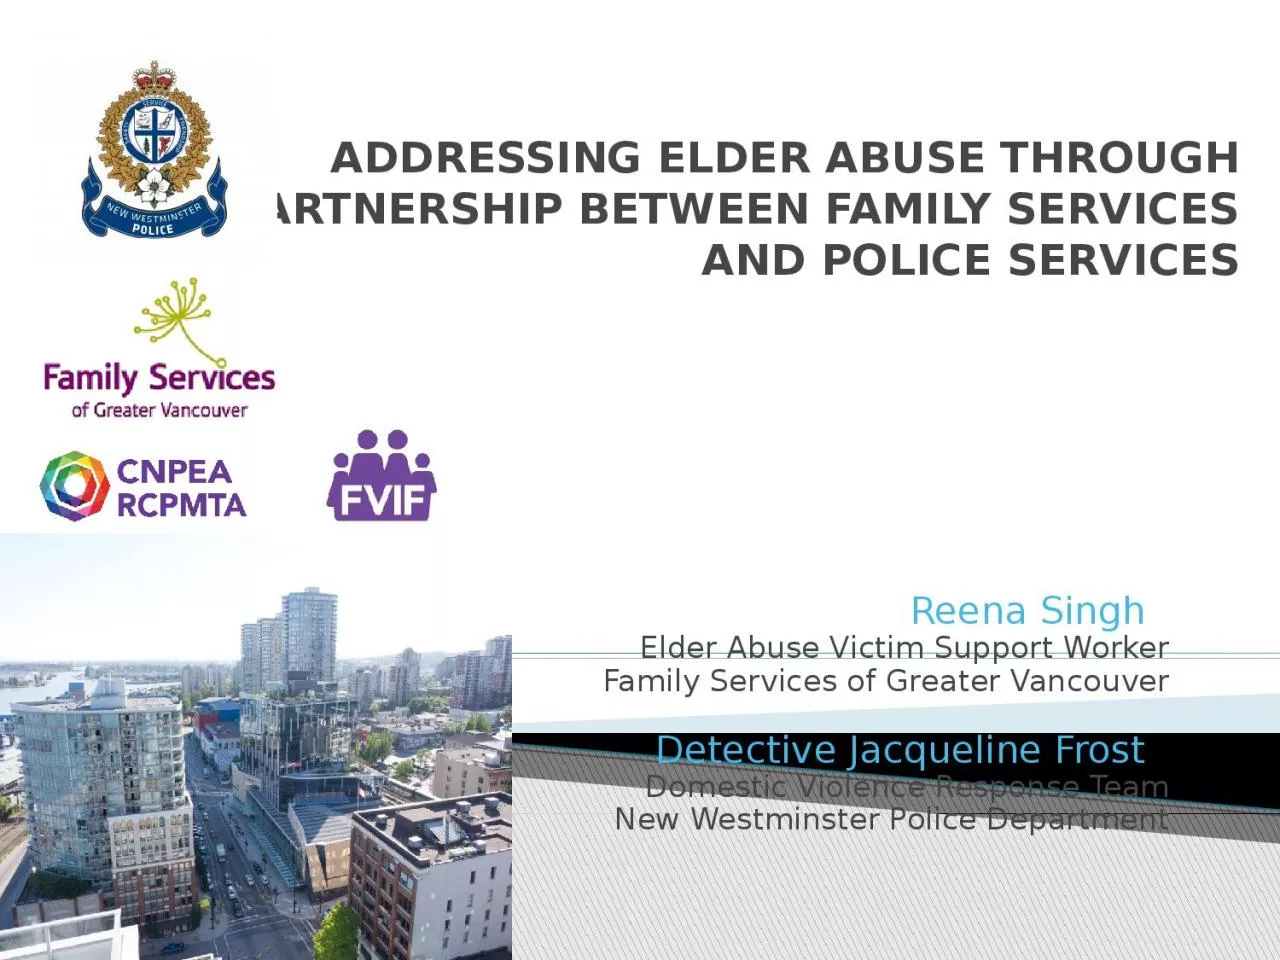 Addressing Elder Abuse through partnership between Family Services and Police Services